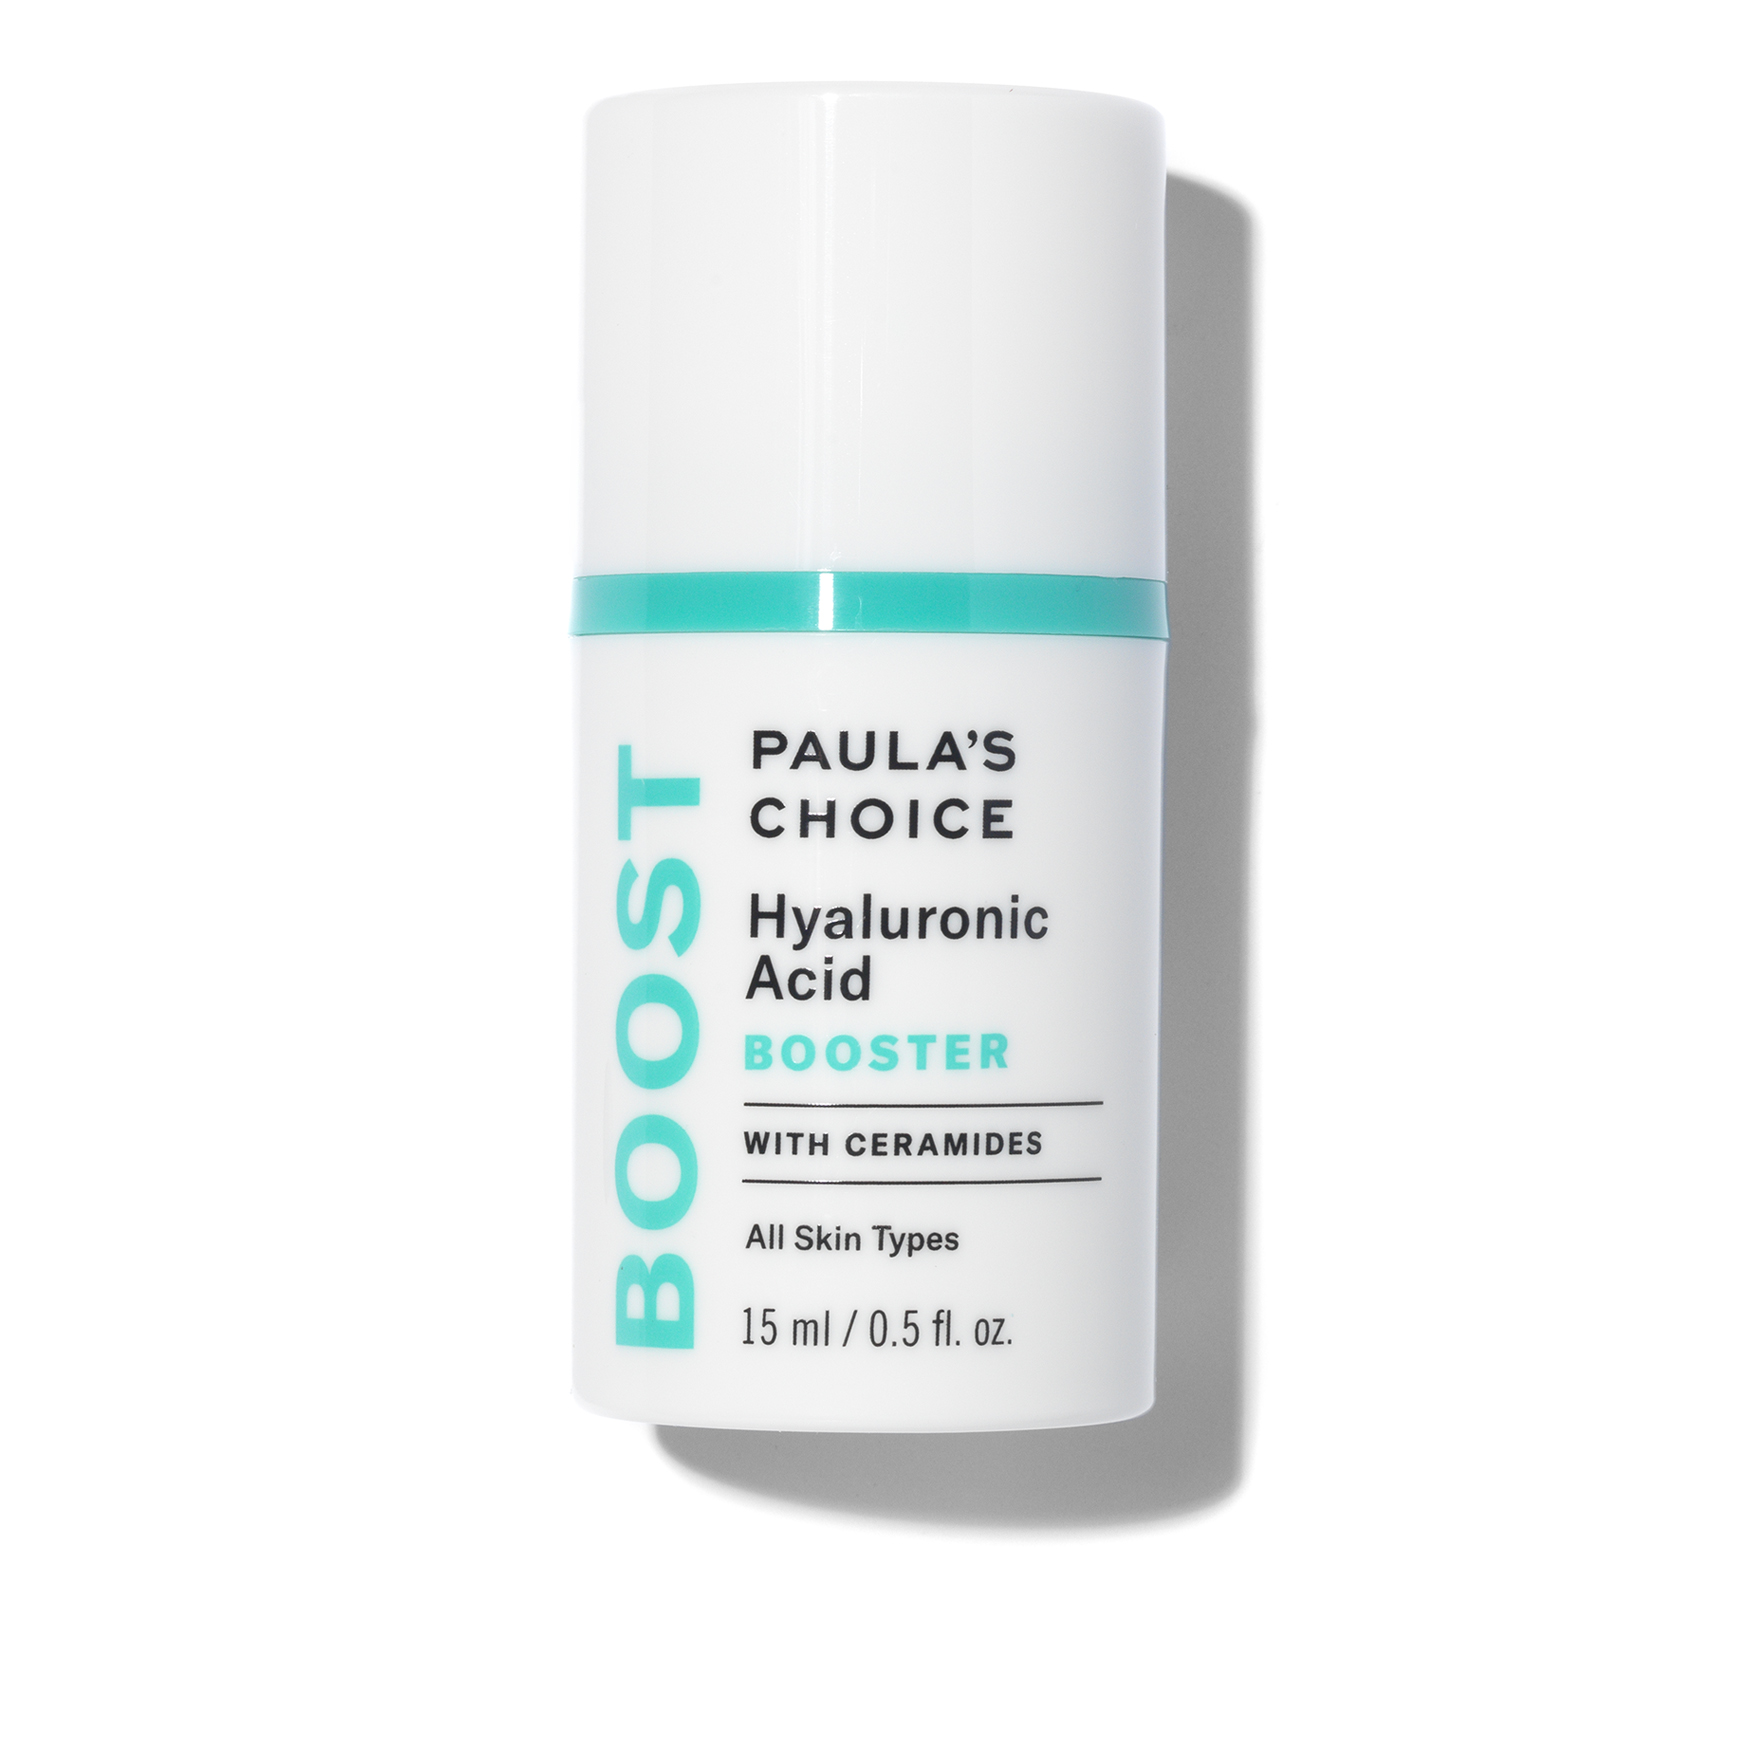 Paula's Choice Hyaluronic Acid Booster | Space NK